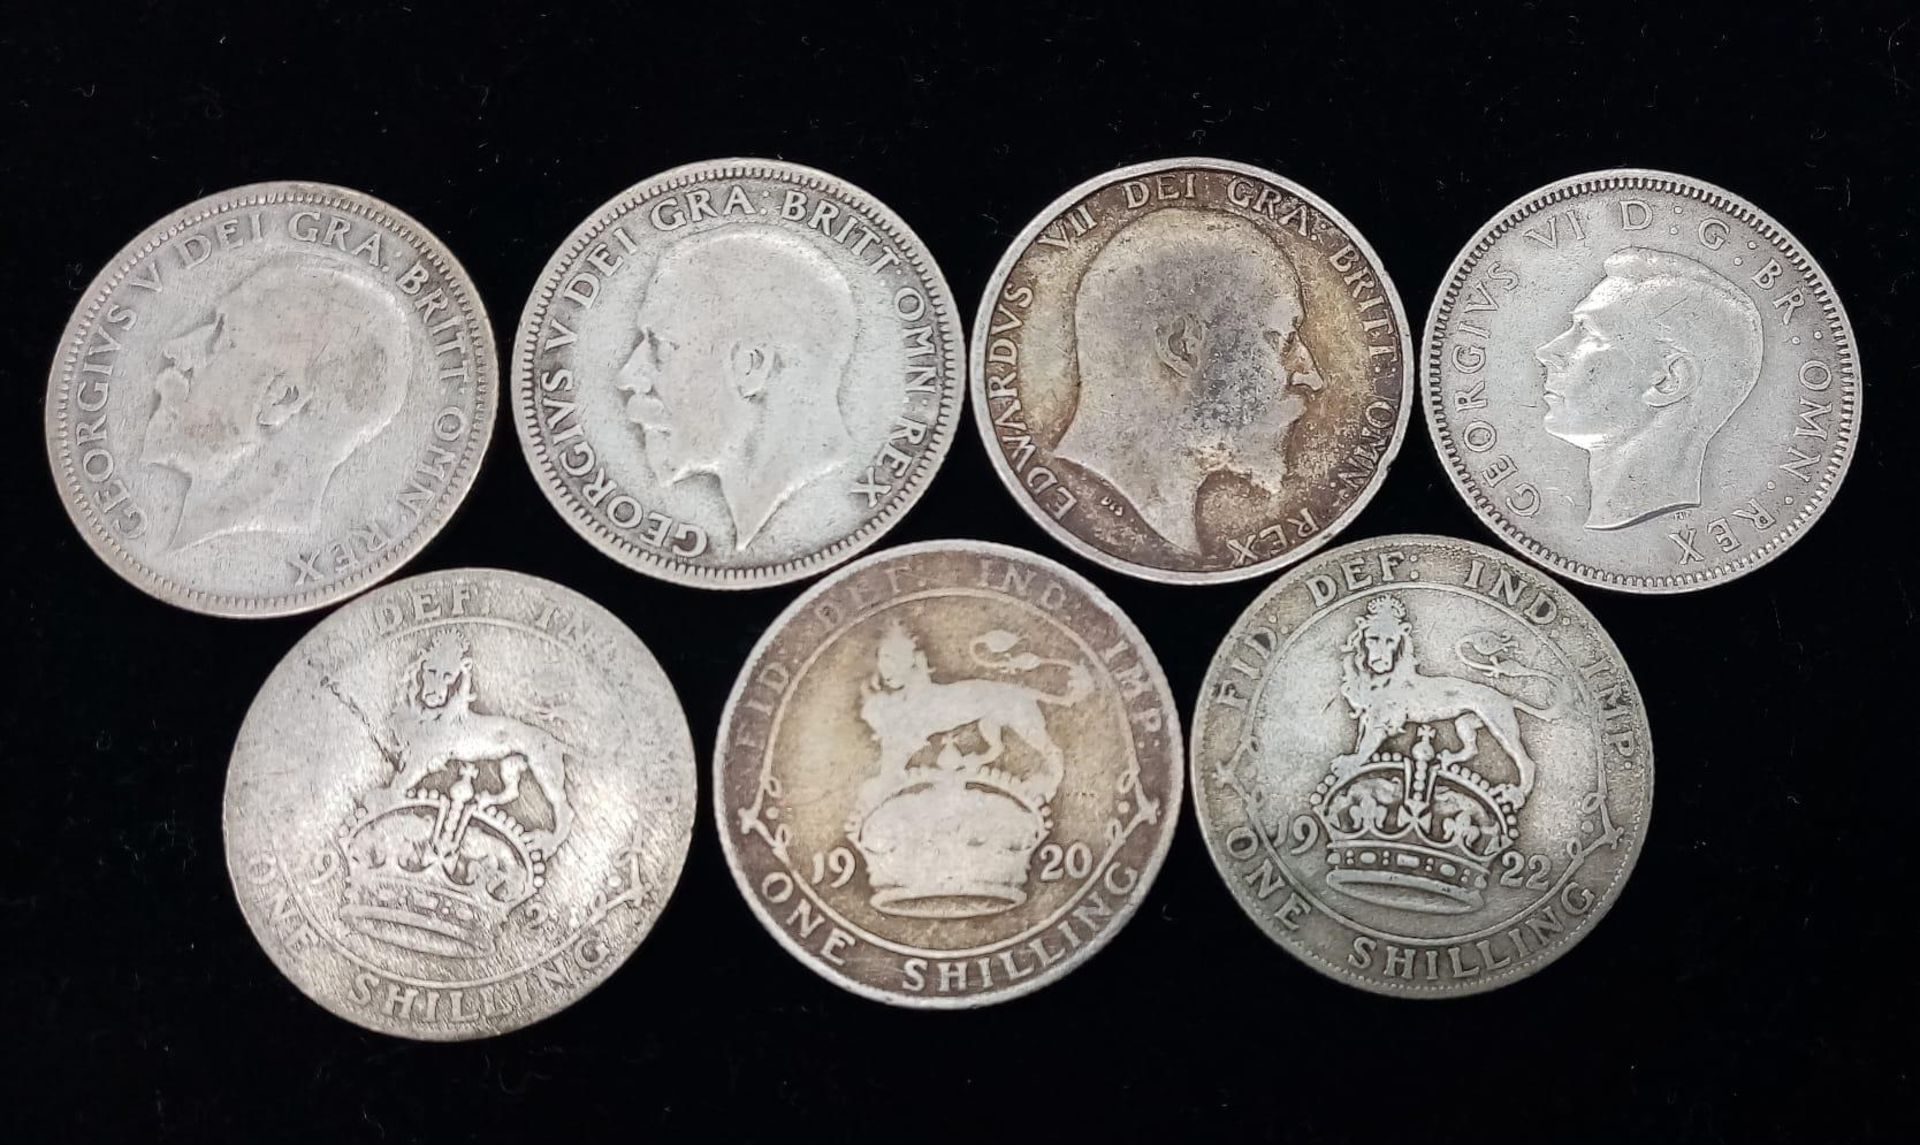 41 Pre 1947 British Silver Shilling Coins. 222g total weight. Please see photos for finer details. - Bild 2 aus 3